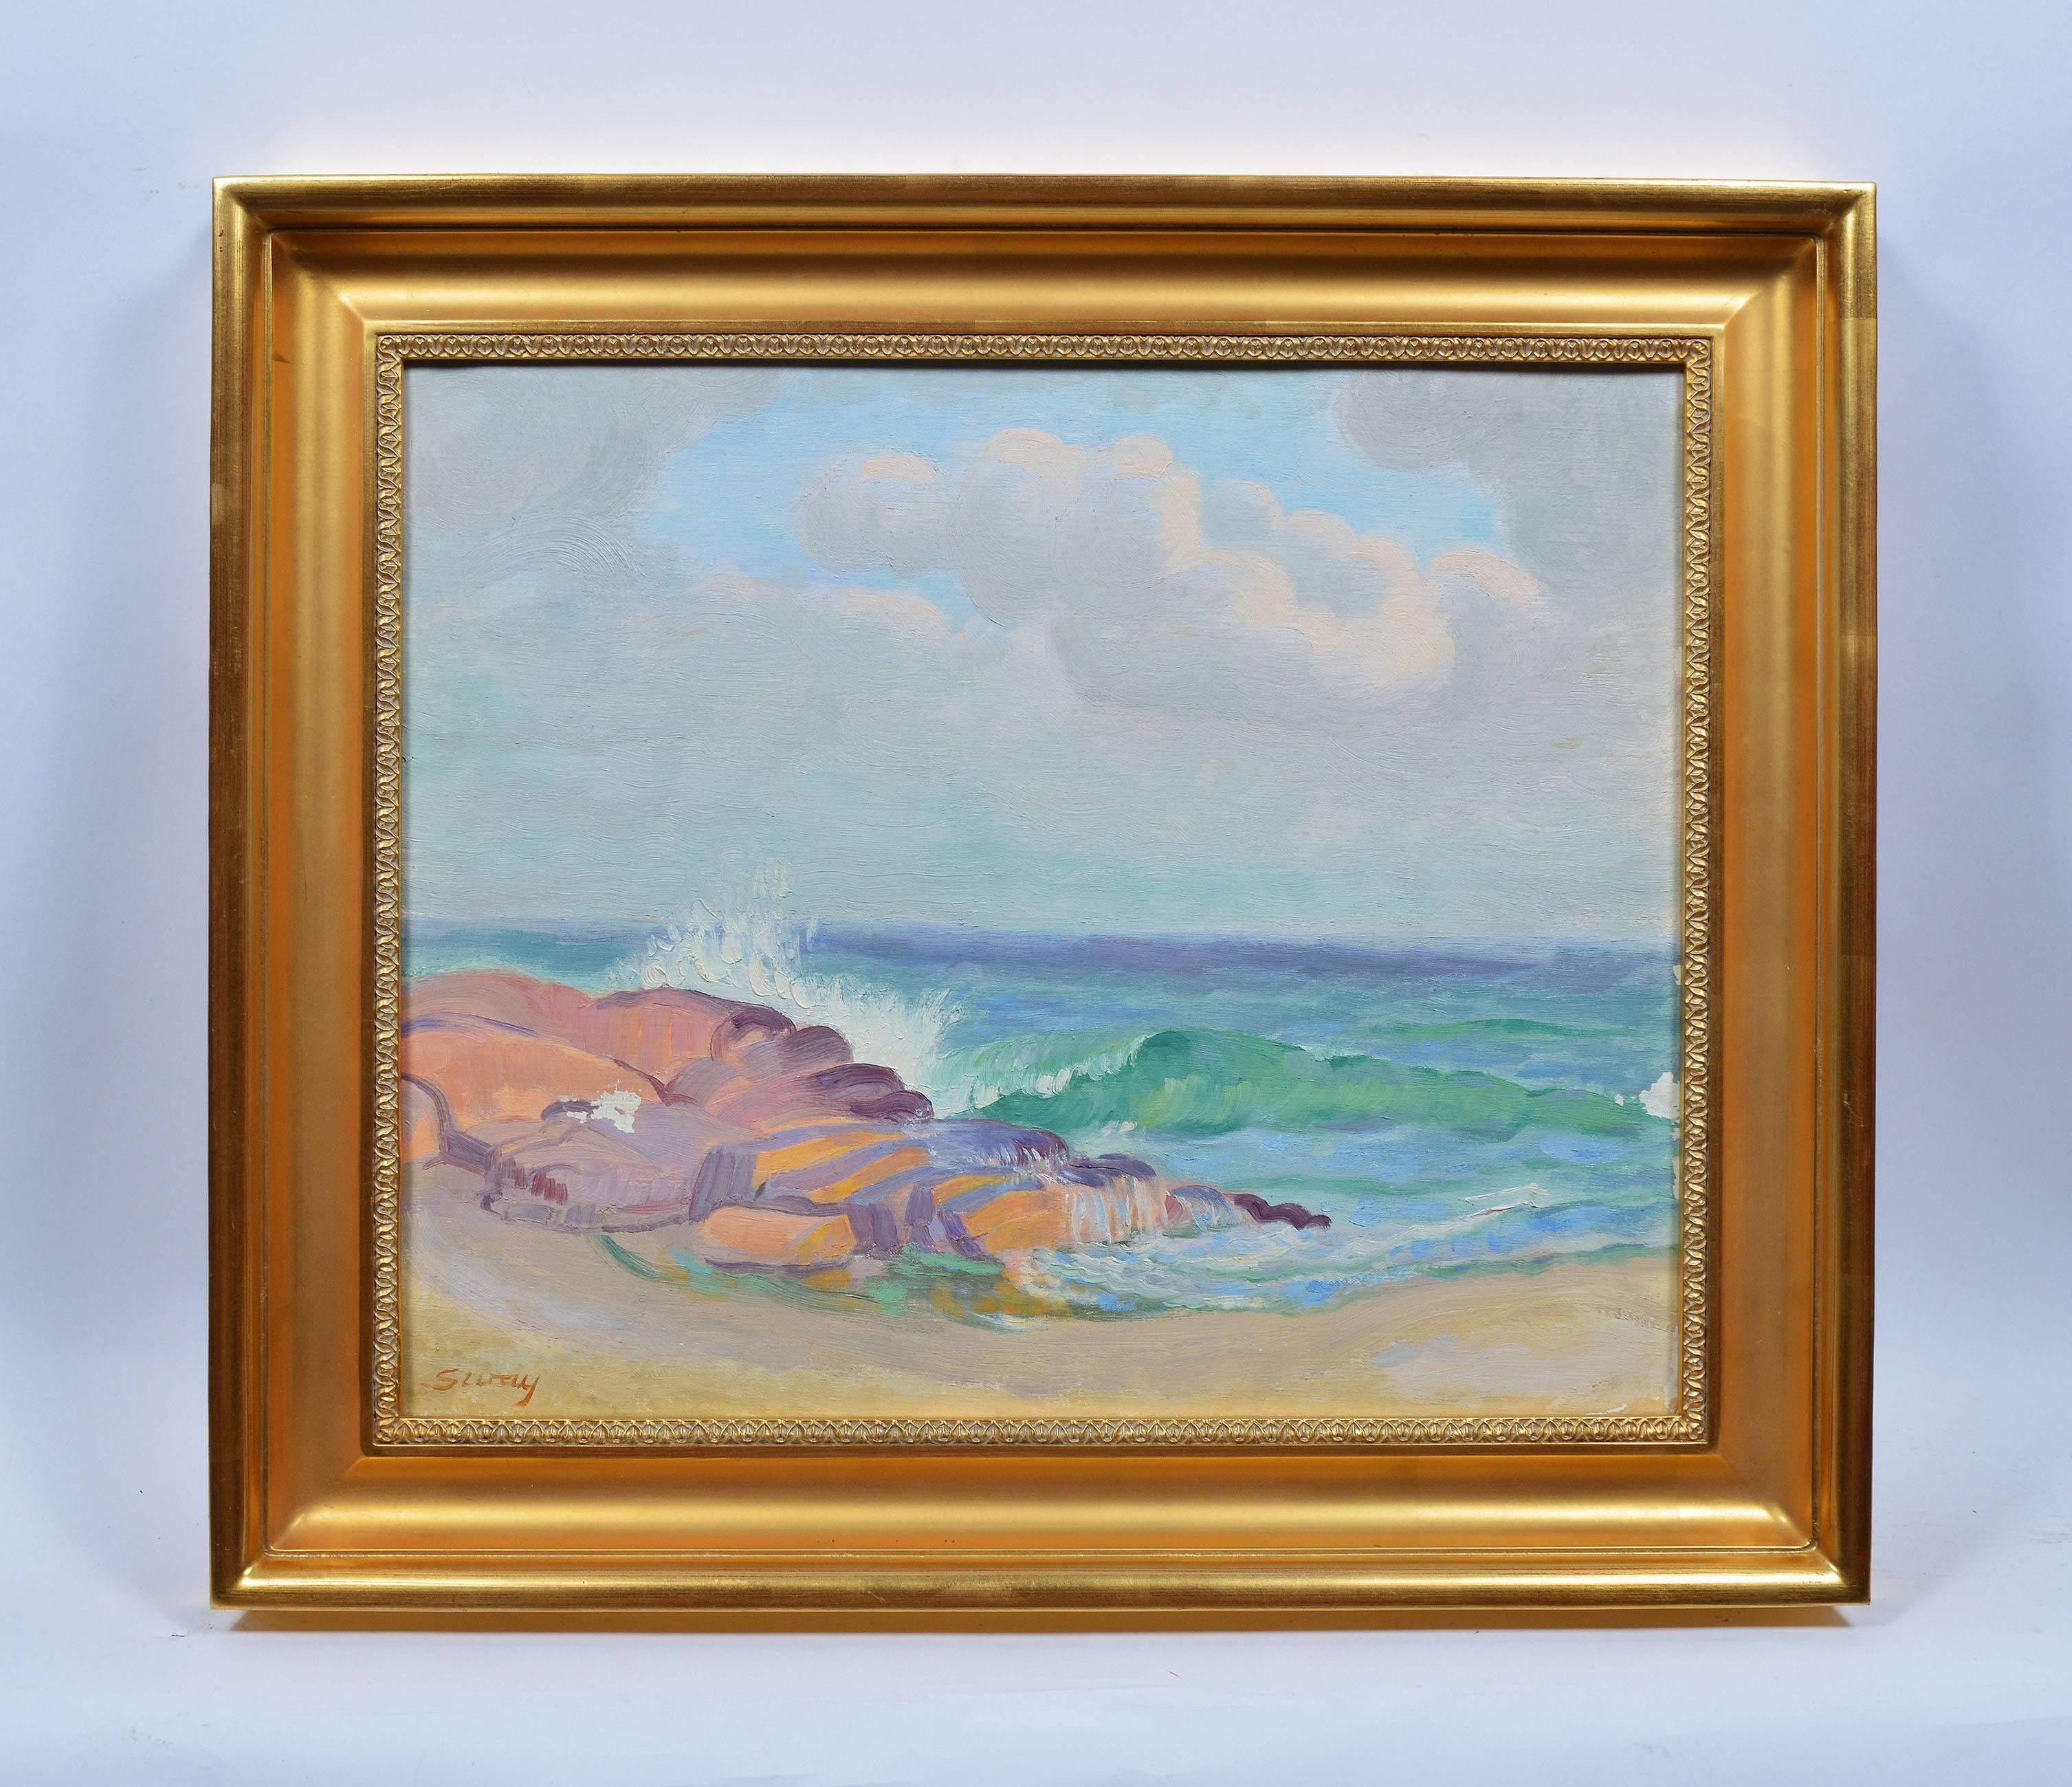 Original oil painting of a beach by Albert Sway (b.1913). Oil on canvas, circa 1940. Signed lower right, "Sway." Image size, 24"L x 20"H.